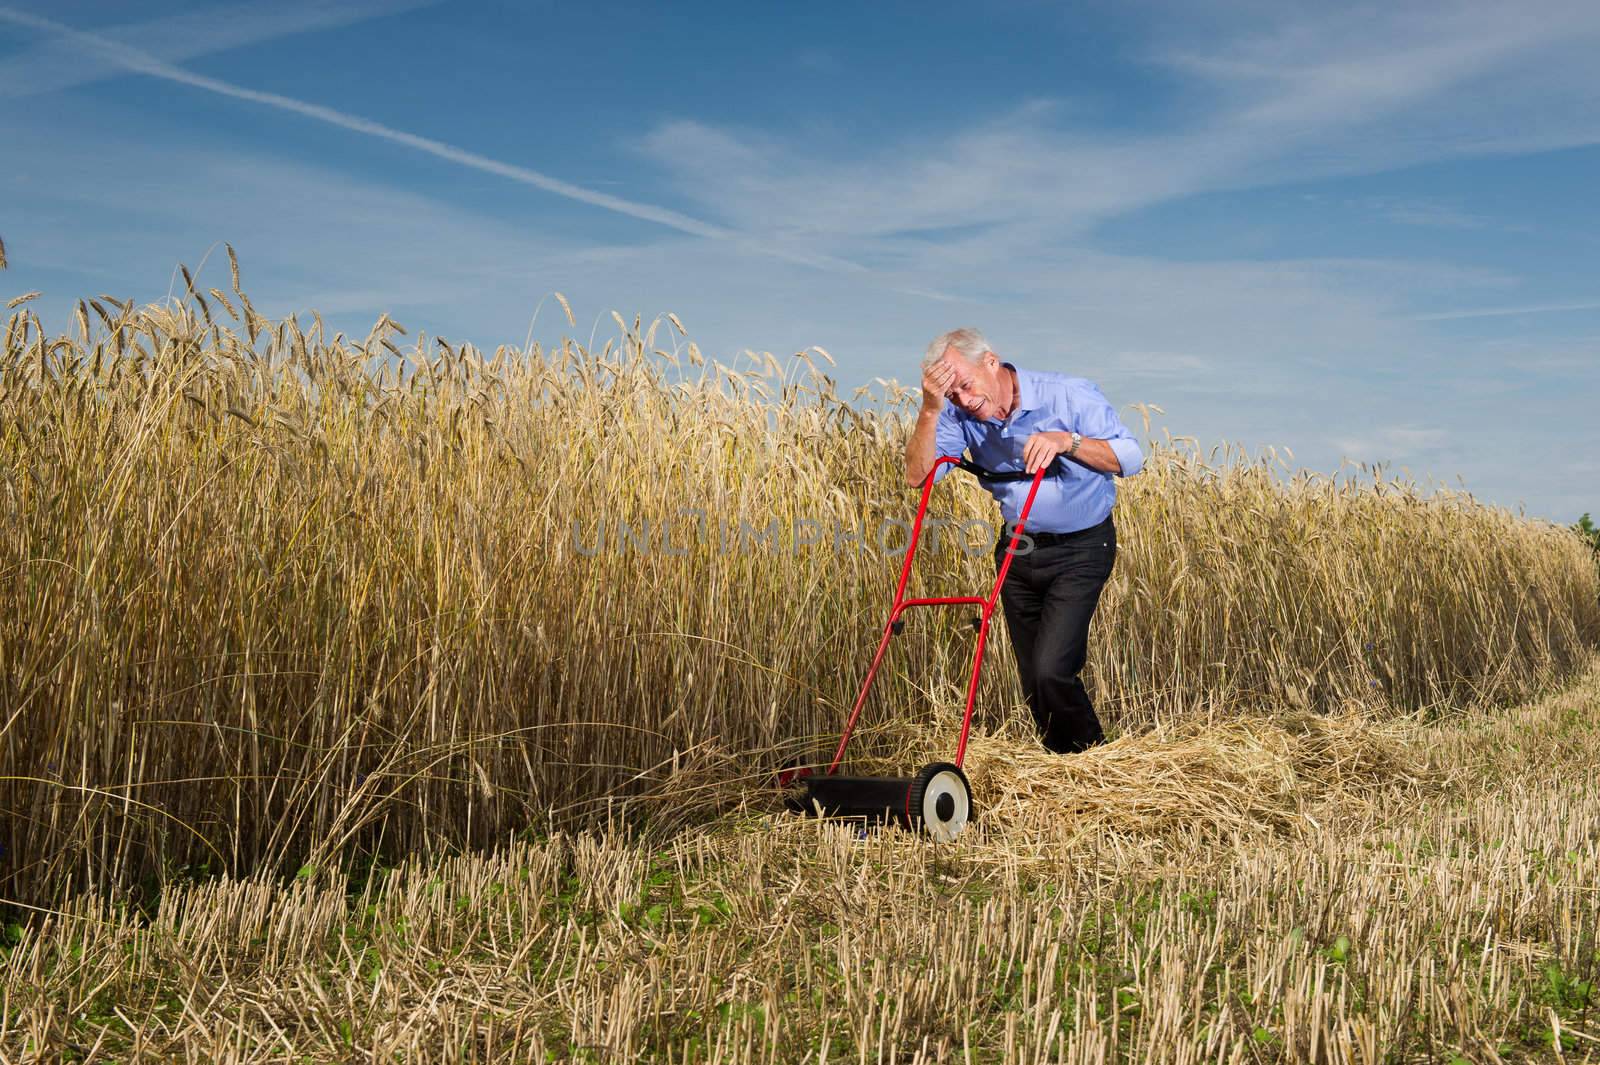 An exhausted senior businessman pauses for a breather while mowing and harvesting a field of ripe golden grain with a manual push type lawnmower, conceptual of business perseverance and determination